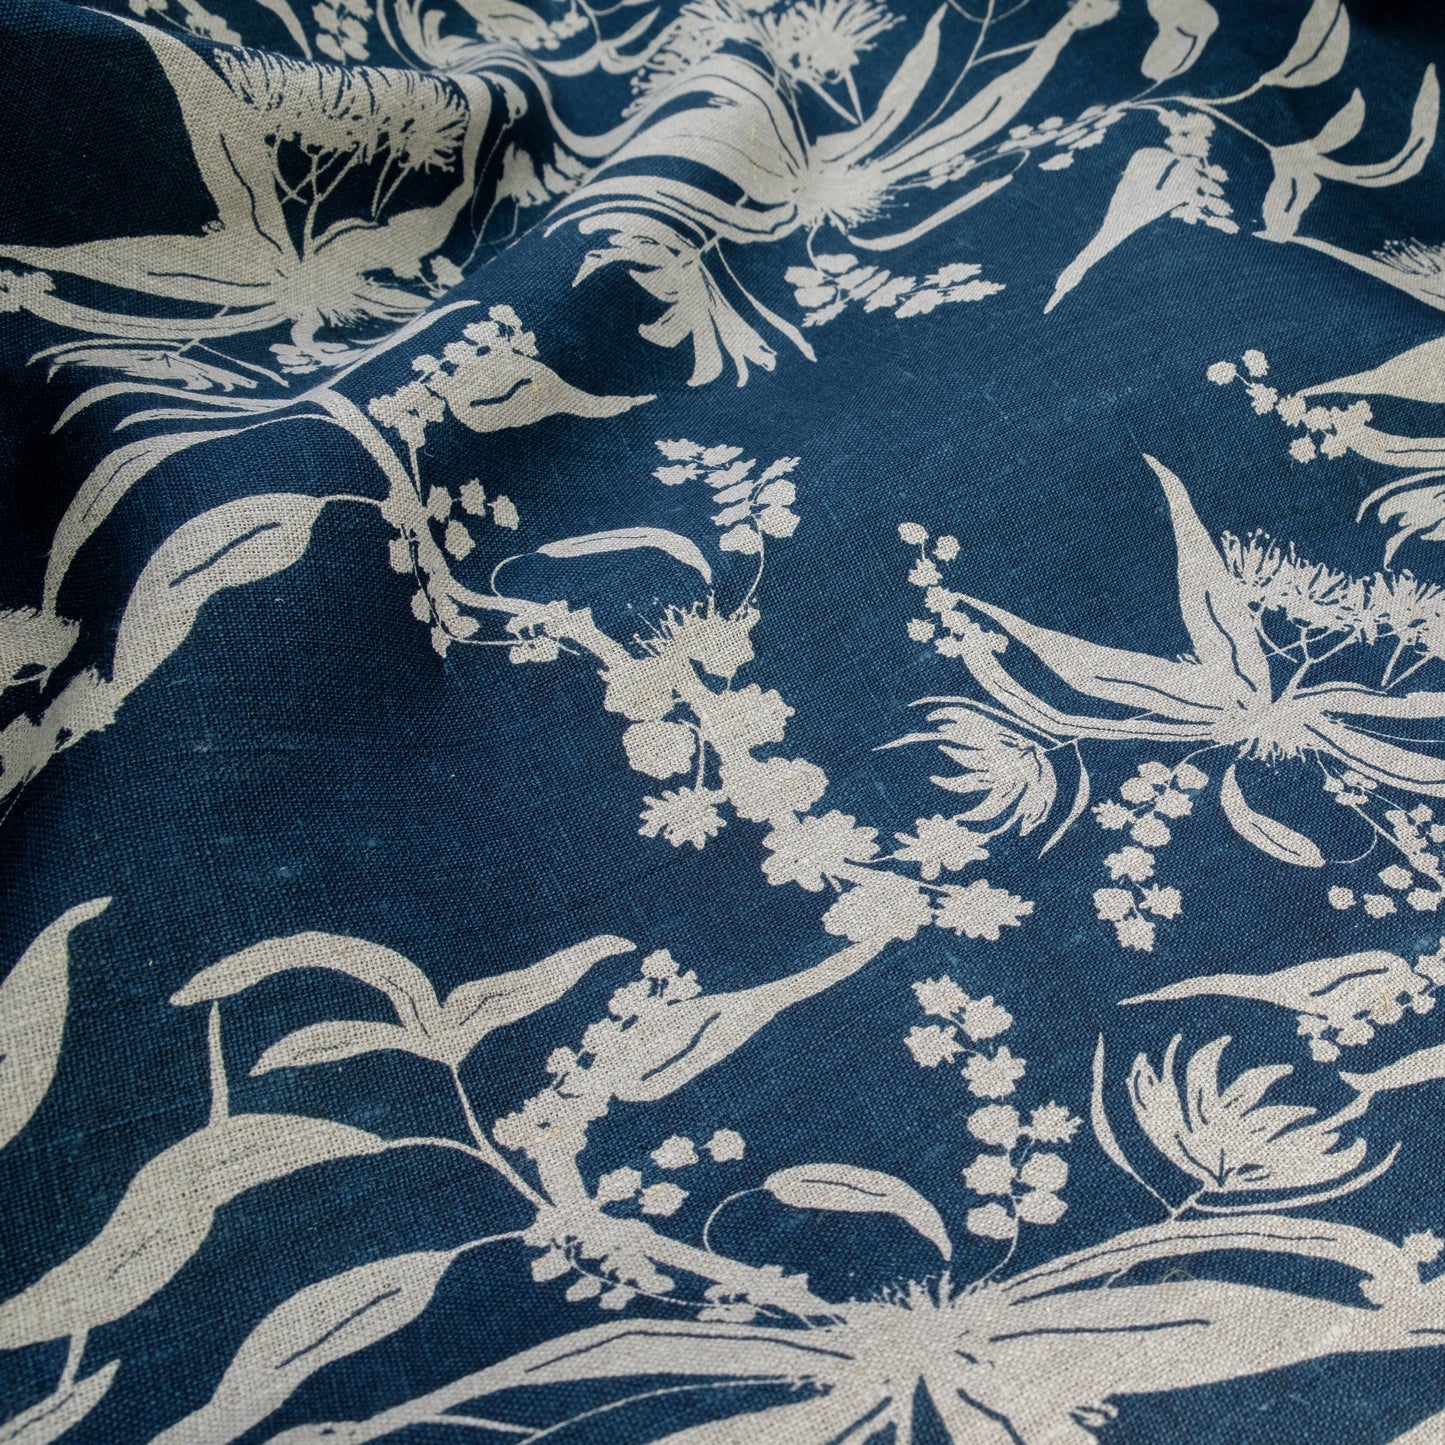 Forager's delight pattern in indigo screenprinted on flax linen. Designed and screenprinted by Femke Textiles in Melbourne Australia.